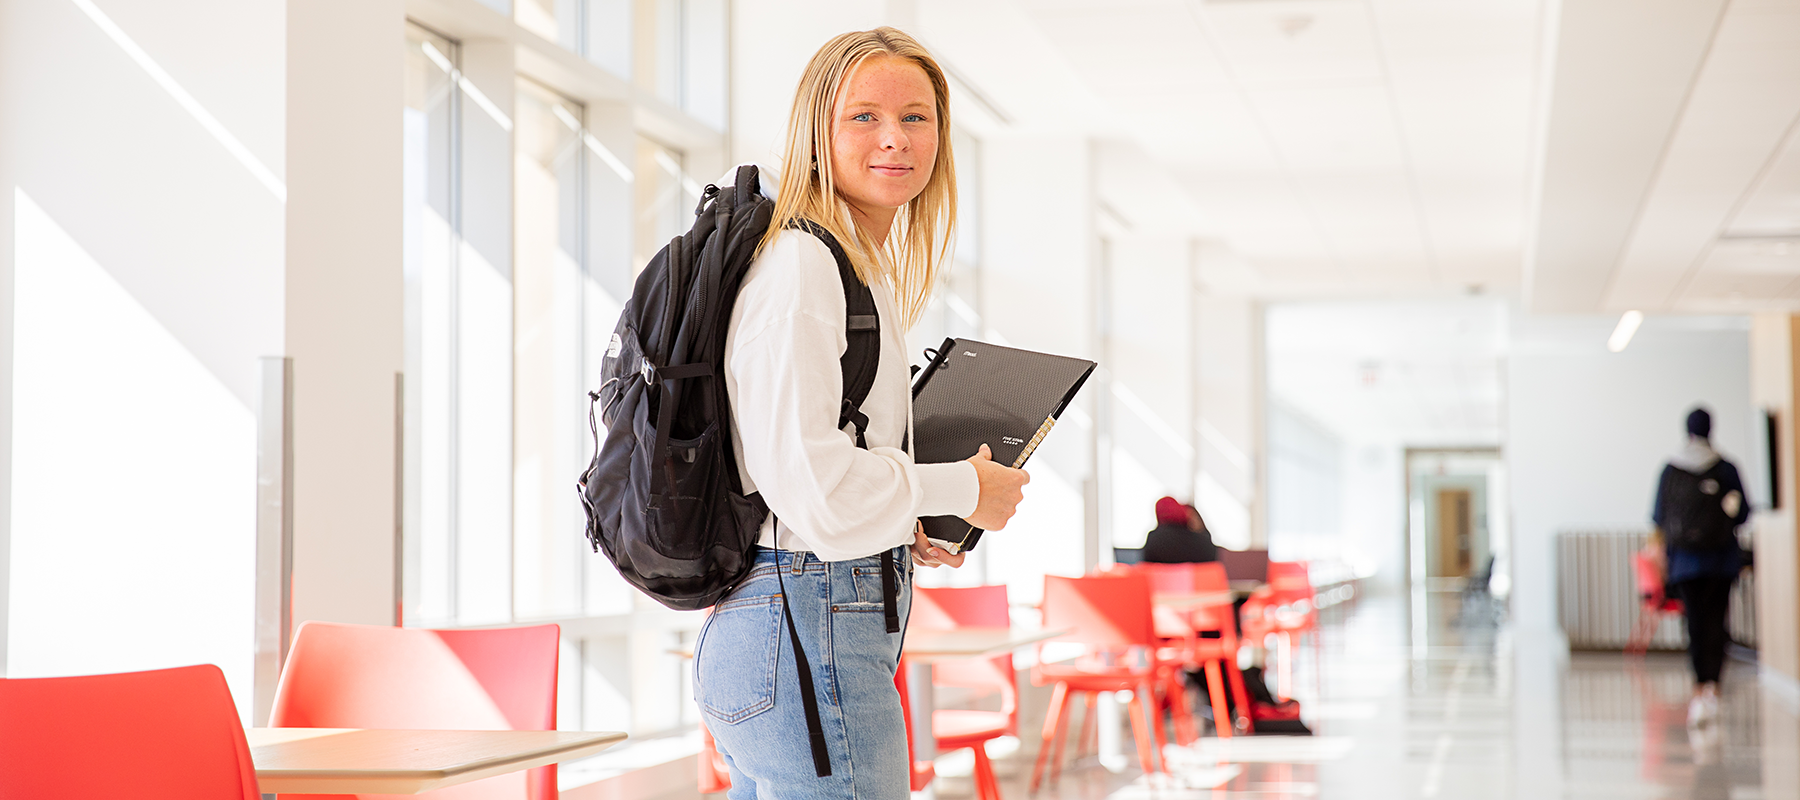 Blonde student wearing a backpack holding a laptop in a